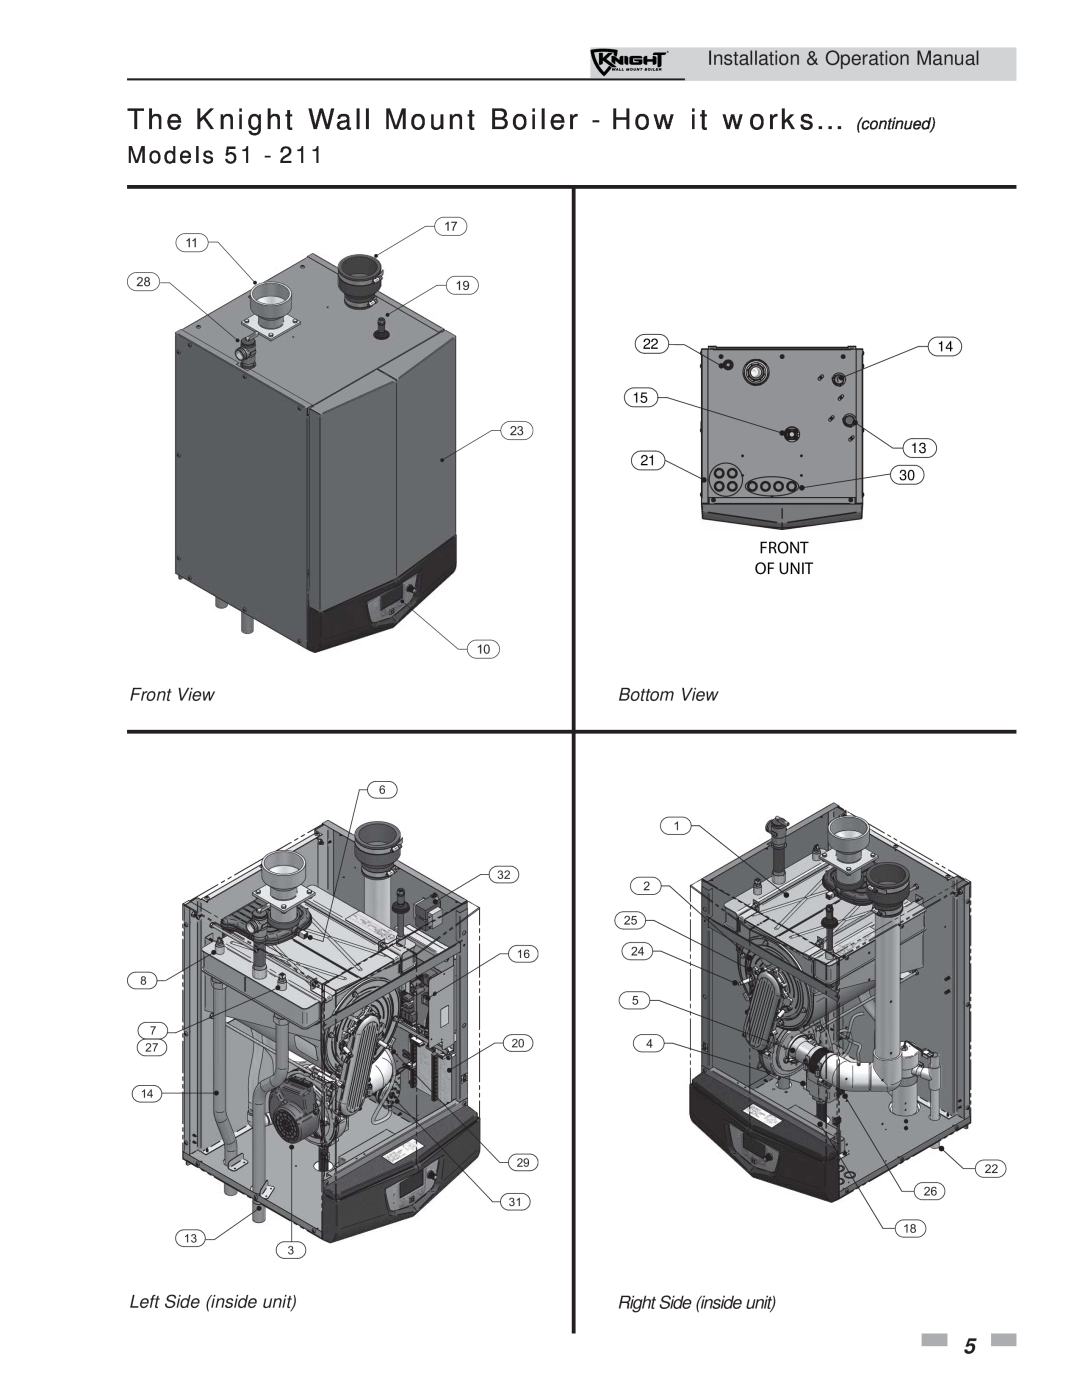 Lochinvar 51-211 The Knight Wall Mount Boiler - How it works... continued, Models 51, Front View, Bottom View, Of Unit 